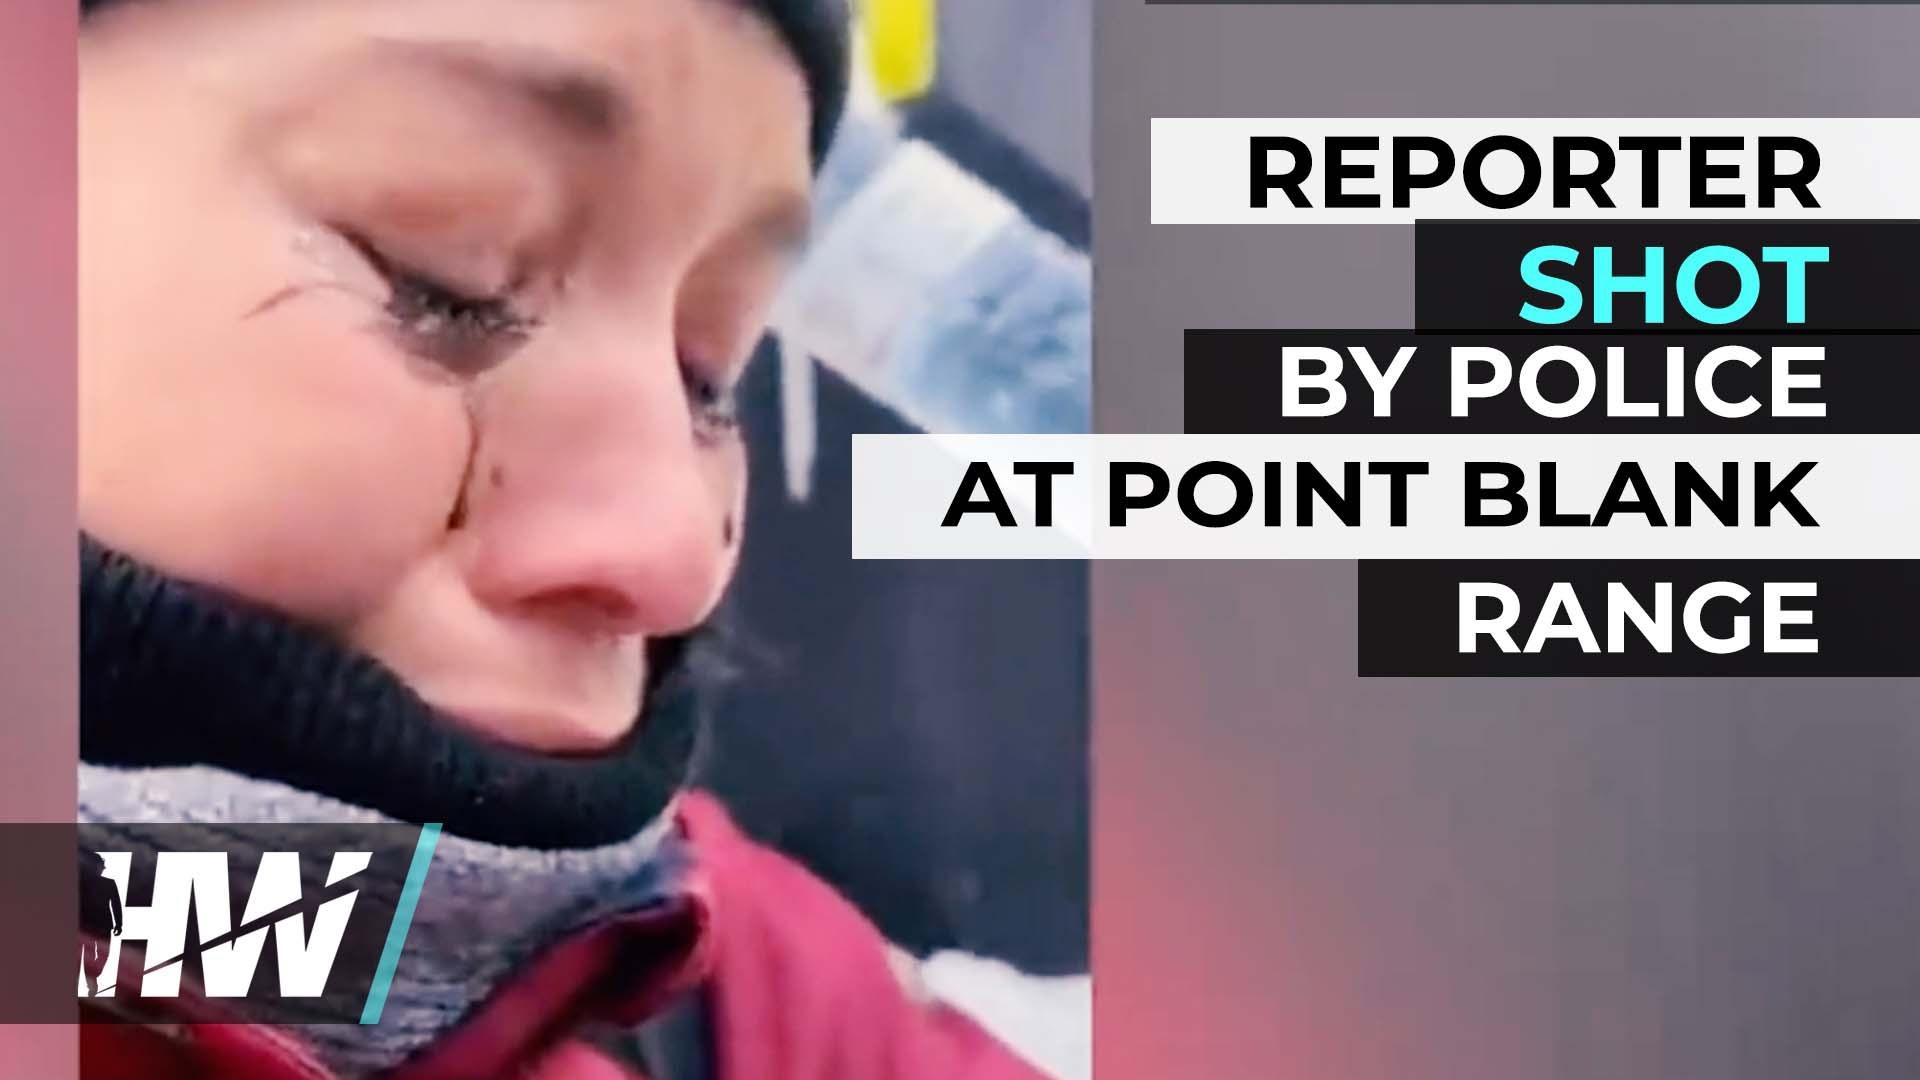 REPORTER SHOT BY POLICE AT POINT BLANK RANGE